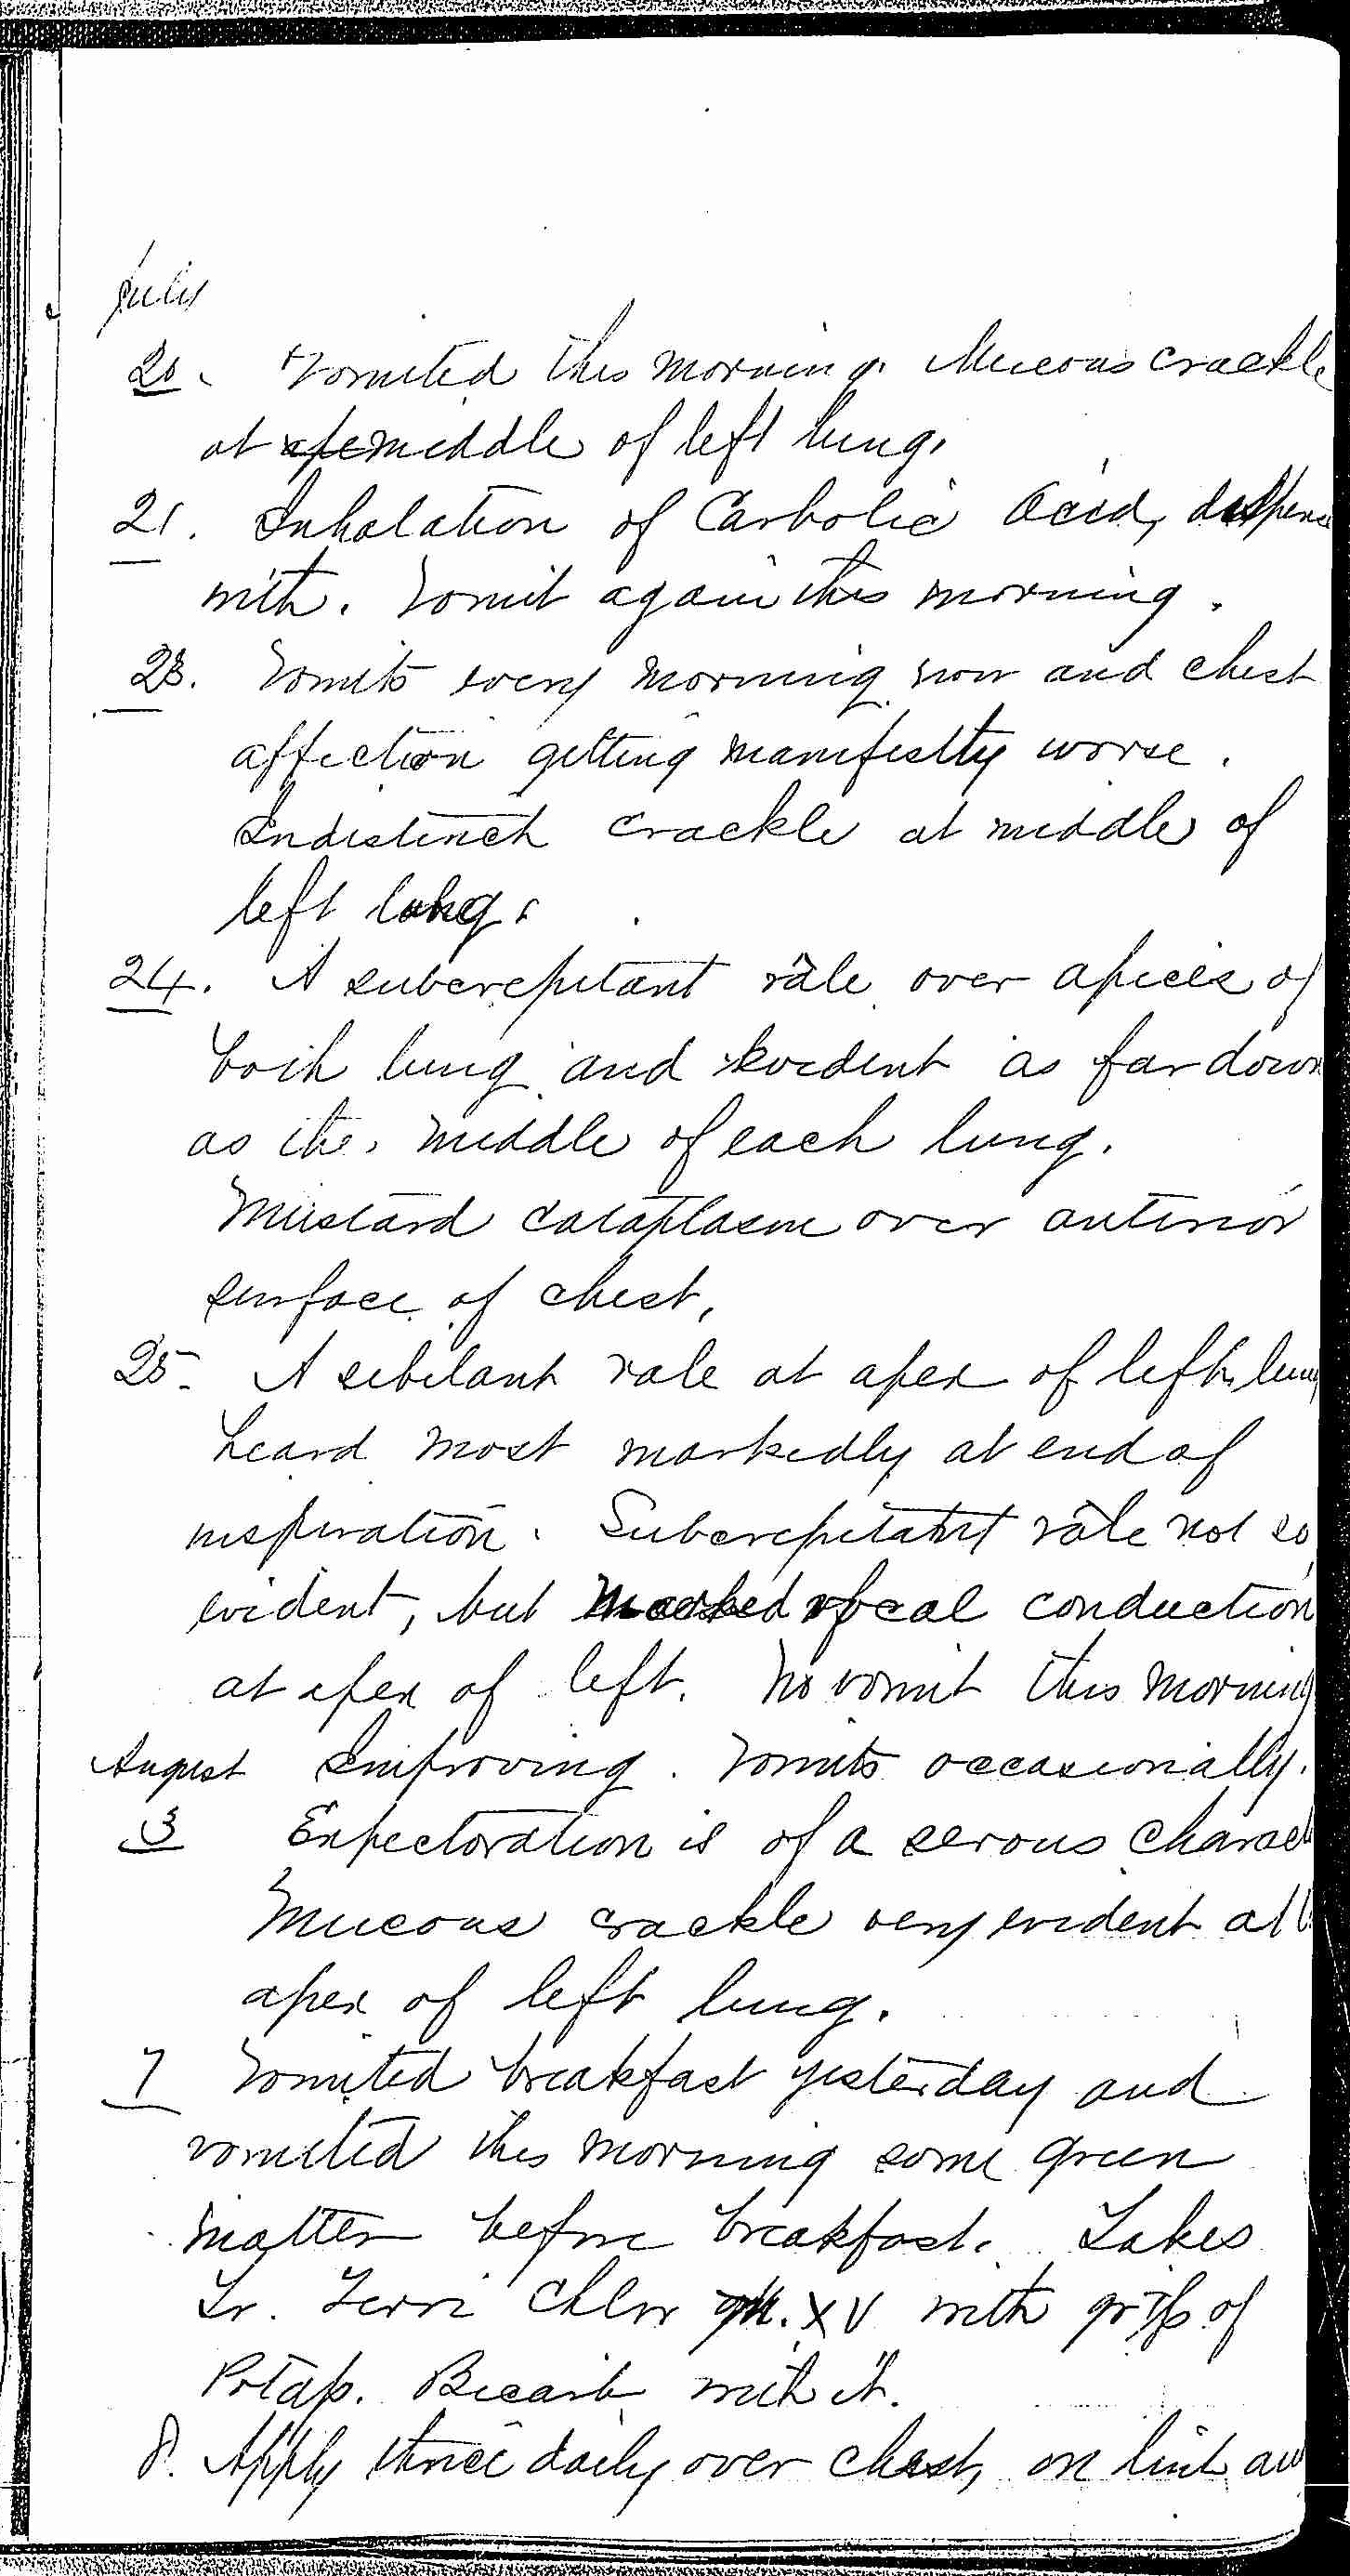 Entry for Hugh Riley (page 30 of 31) in the log Hospital Tickets and Case Papers - Naval Hospital - Washington, D.C. - 1868-69